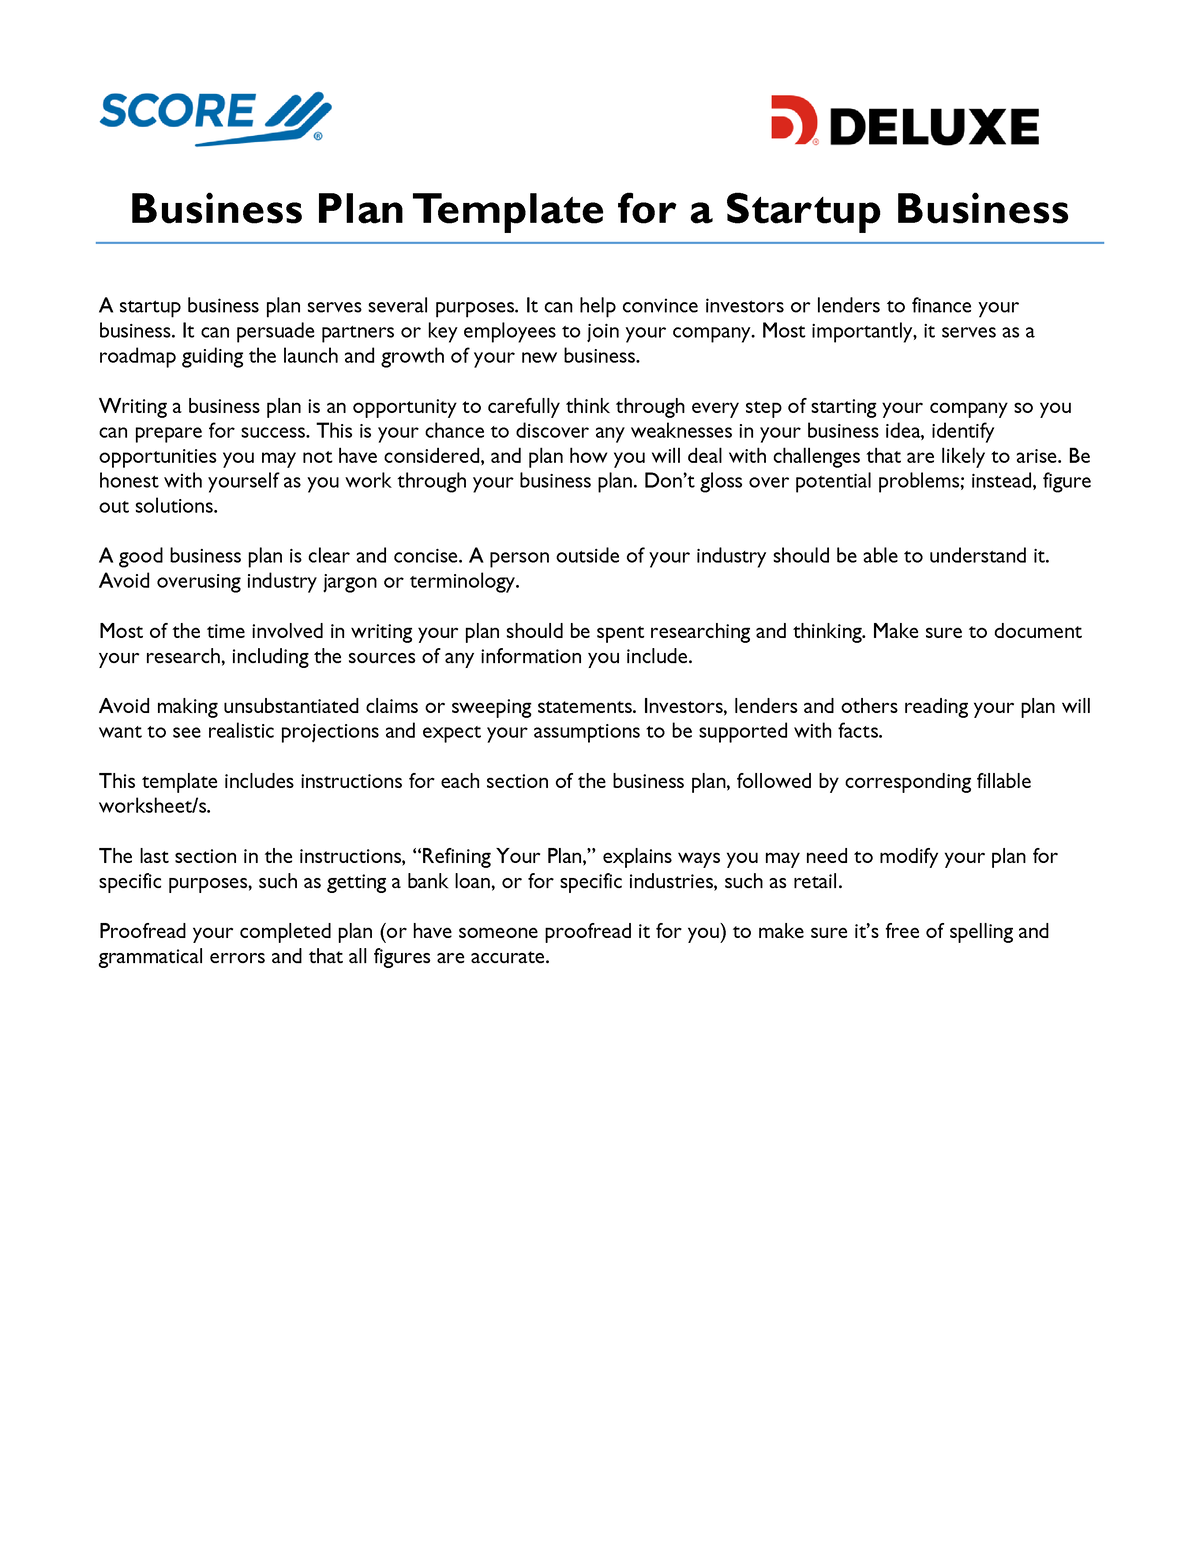 Startup Business Plan Template Business Plan Template For A Startup